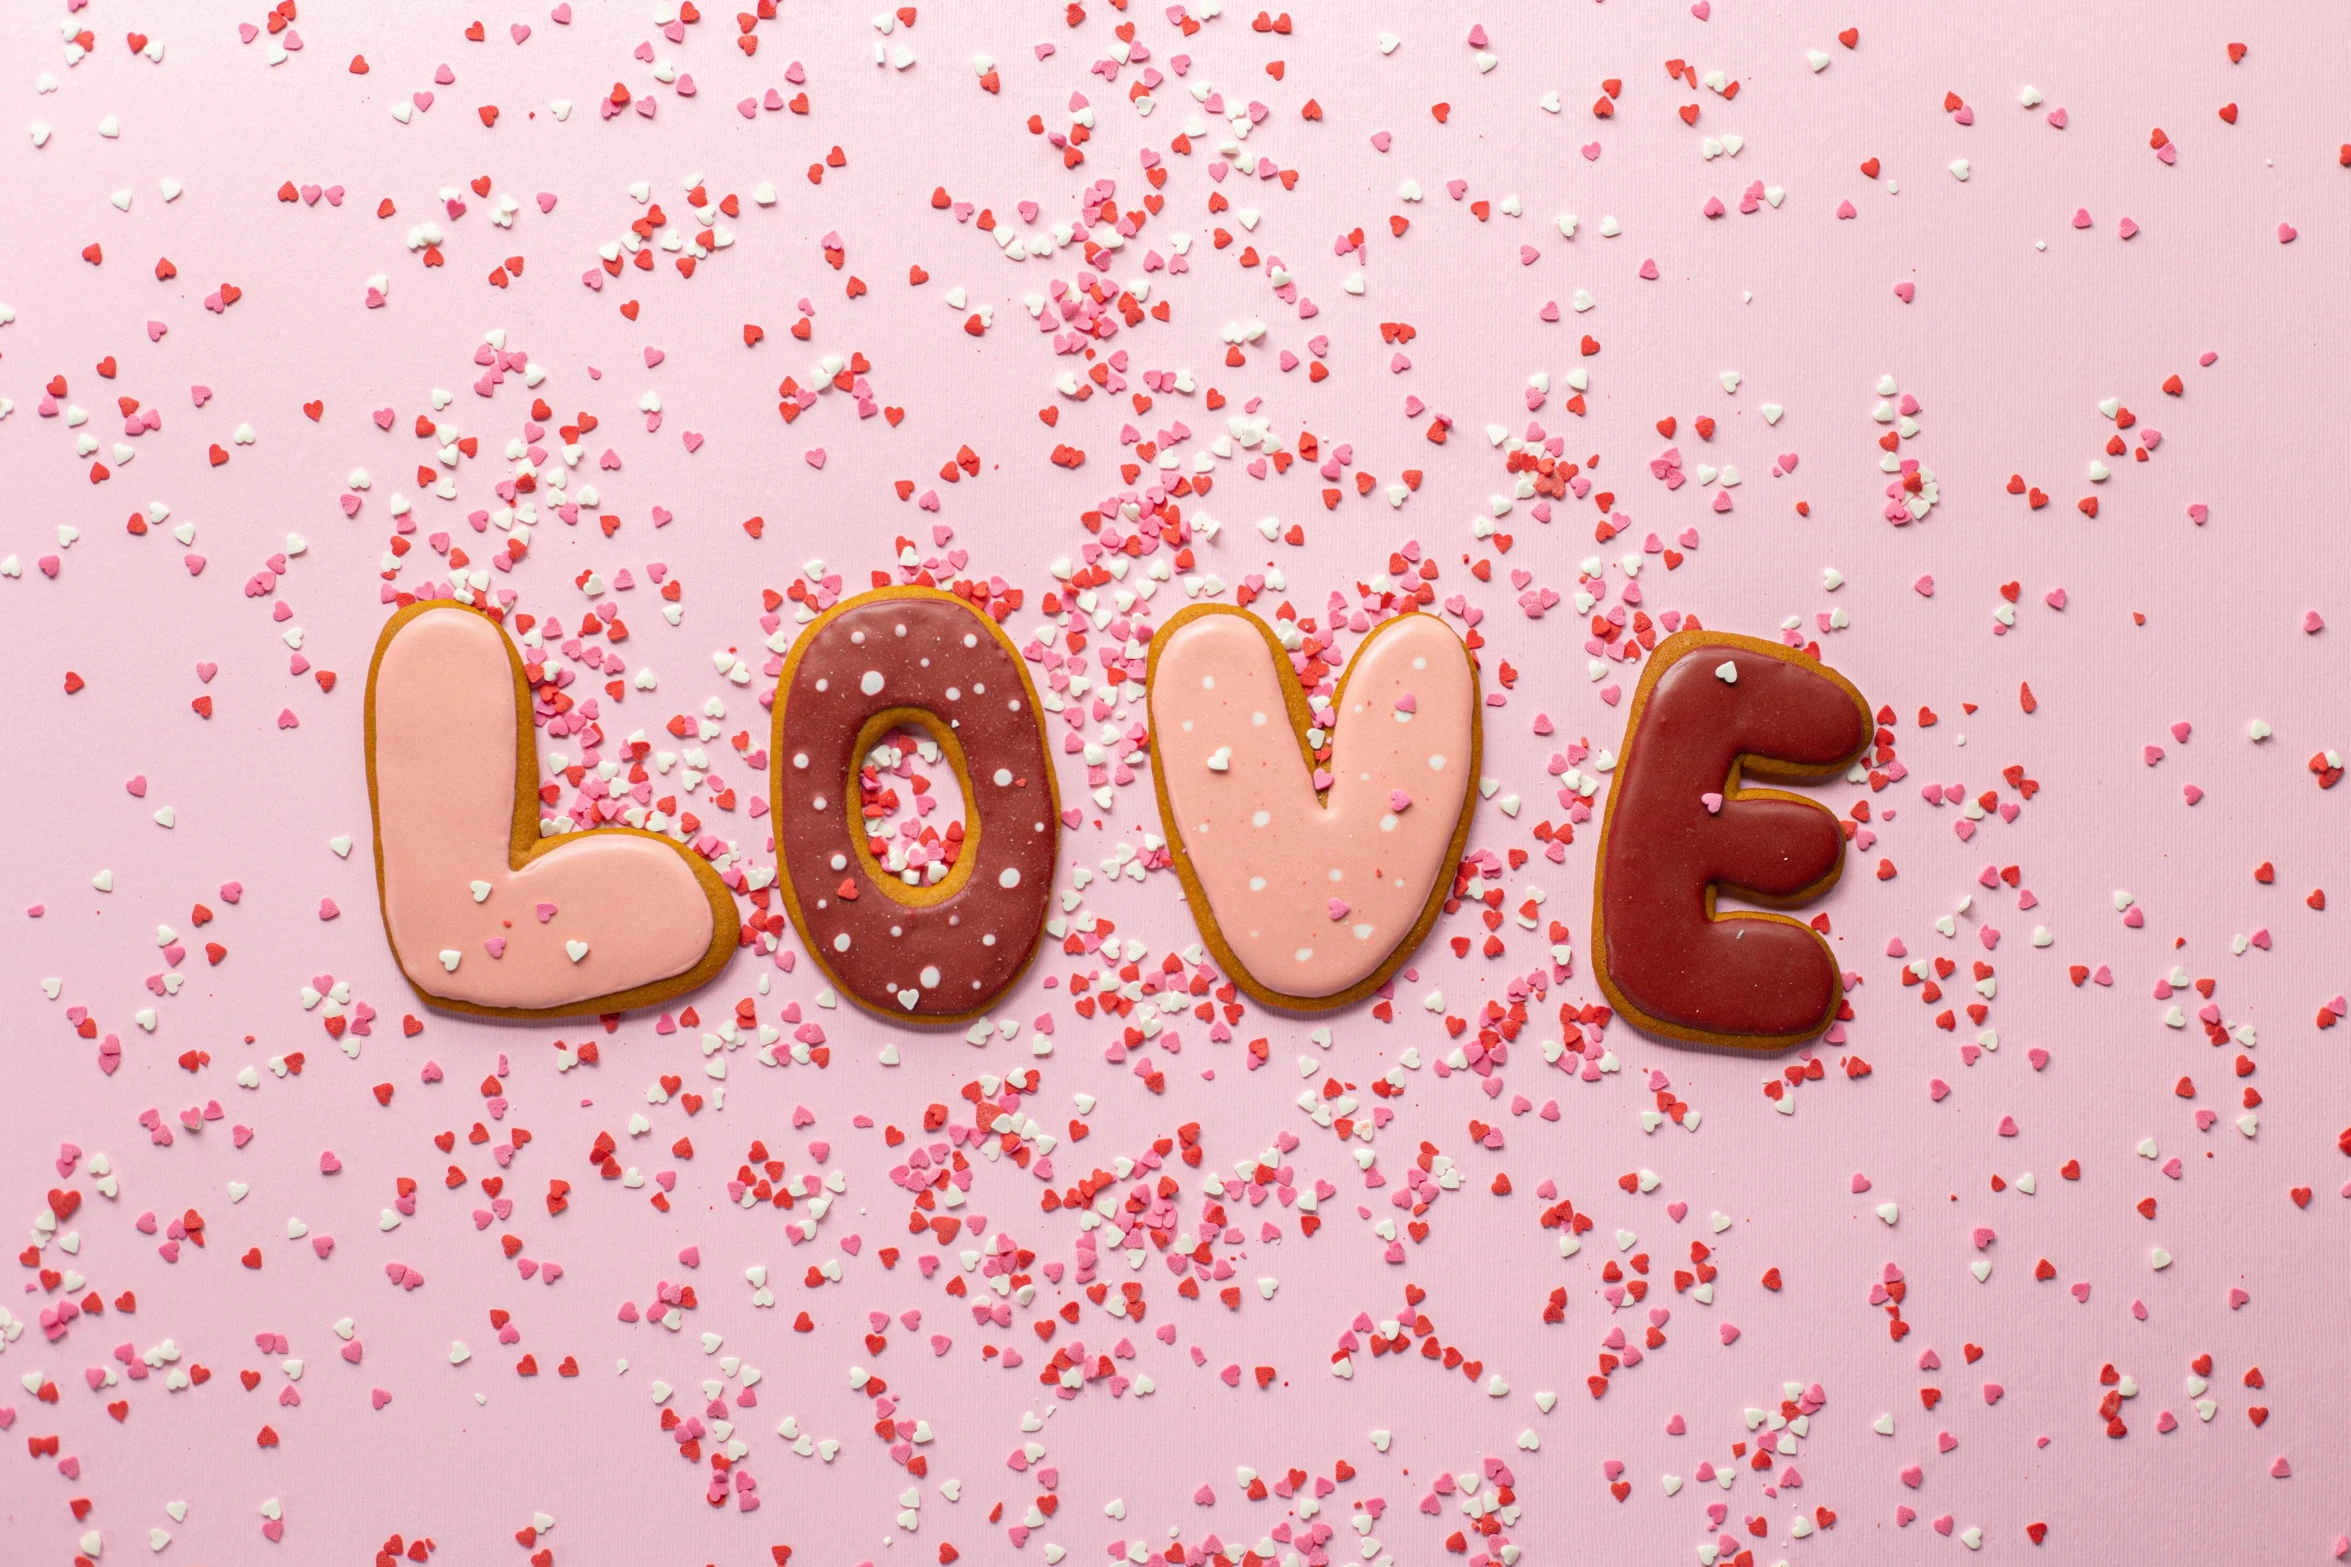 the word love spelled in chocolate and sprinkles on a pink background, by Julia Pishtar, pexels, graffiti, cookies, background image, ginger, fanart